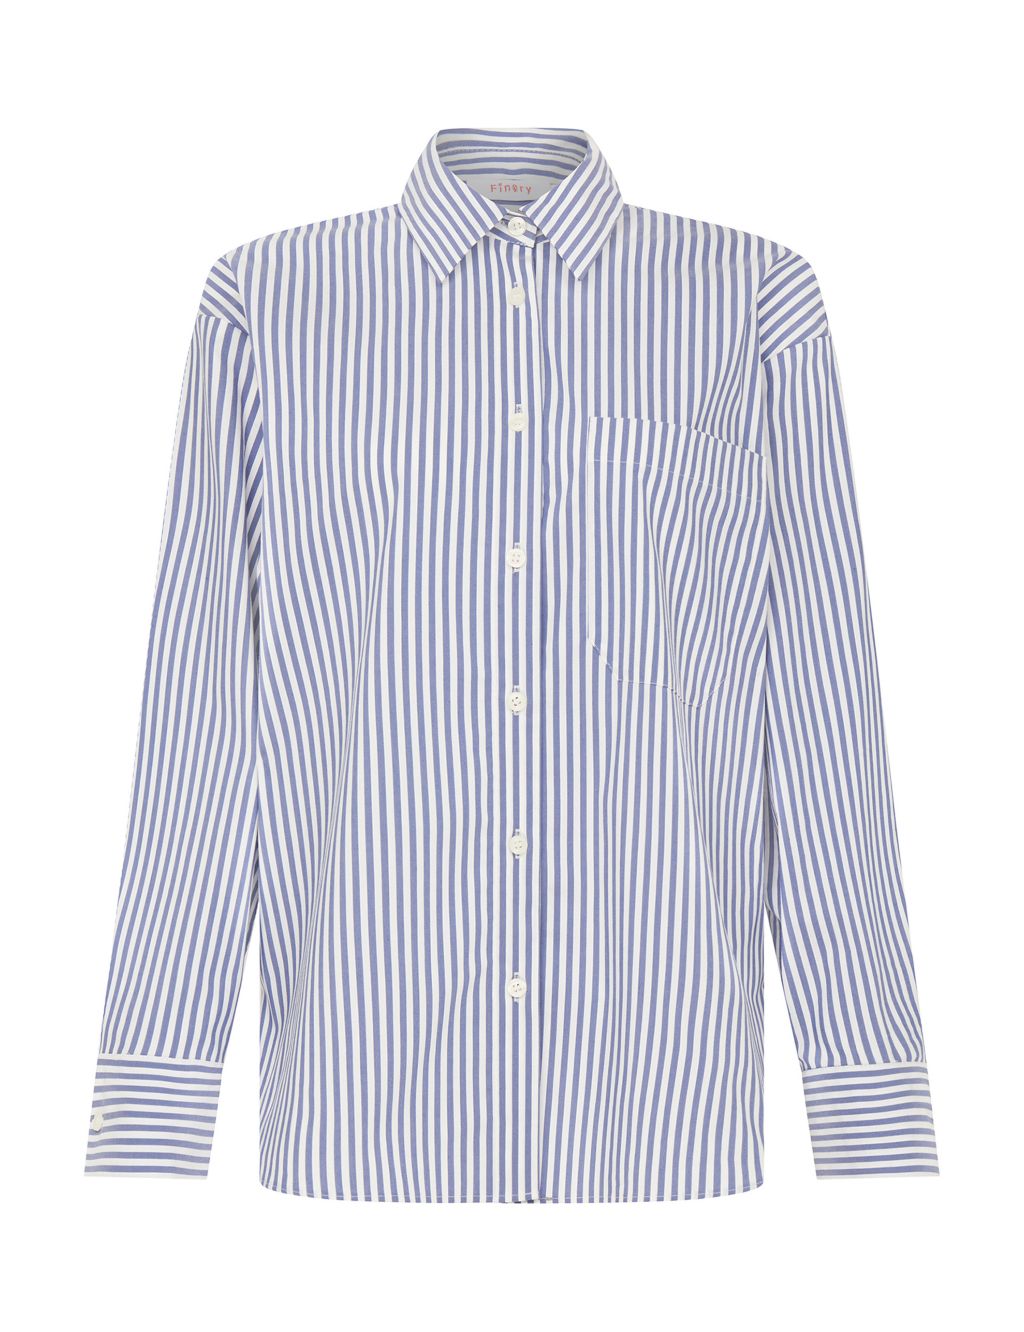 Cotton Rich Striped Collared Shirt image 2